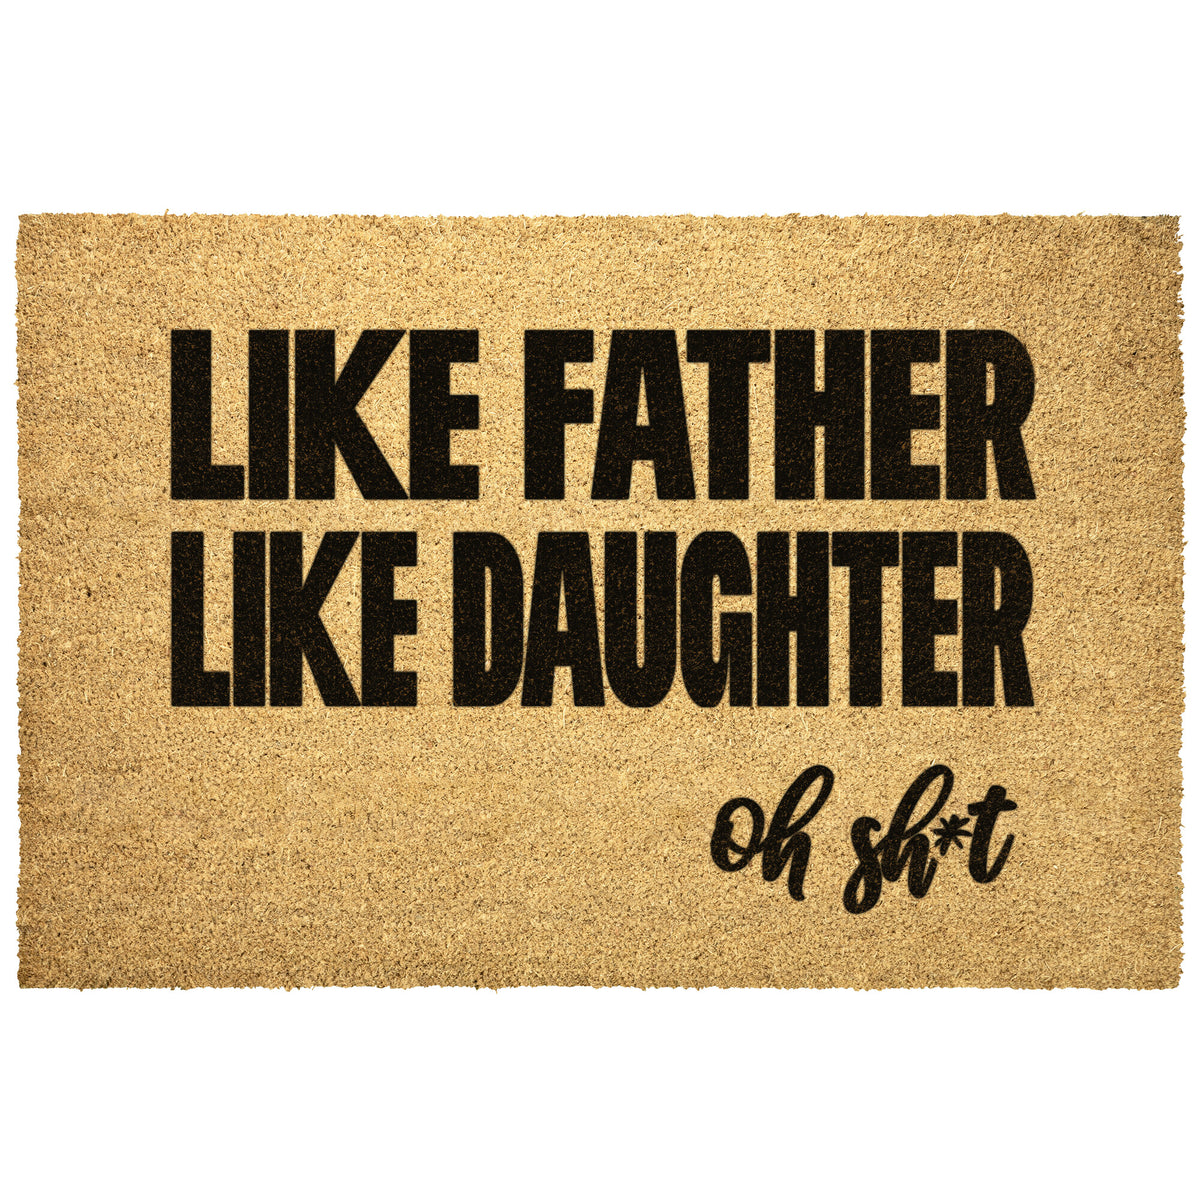 Like Father Like Daughter Doormat